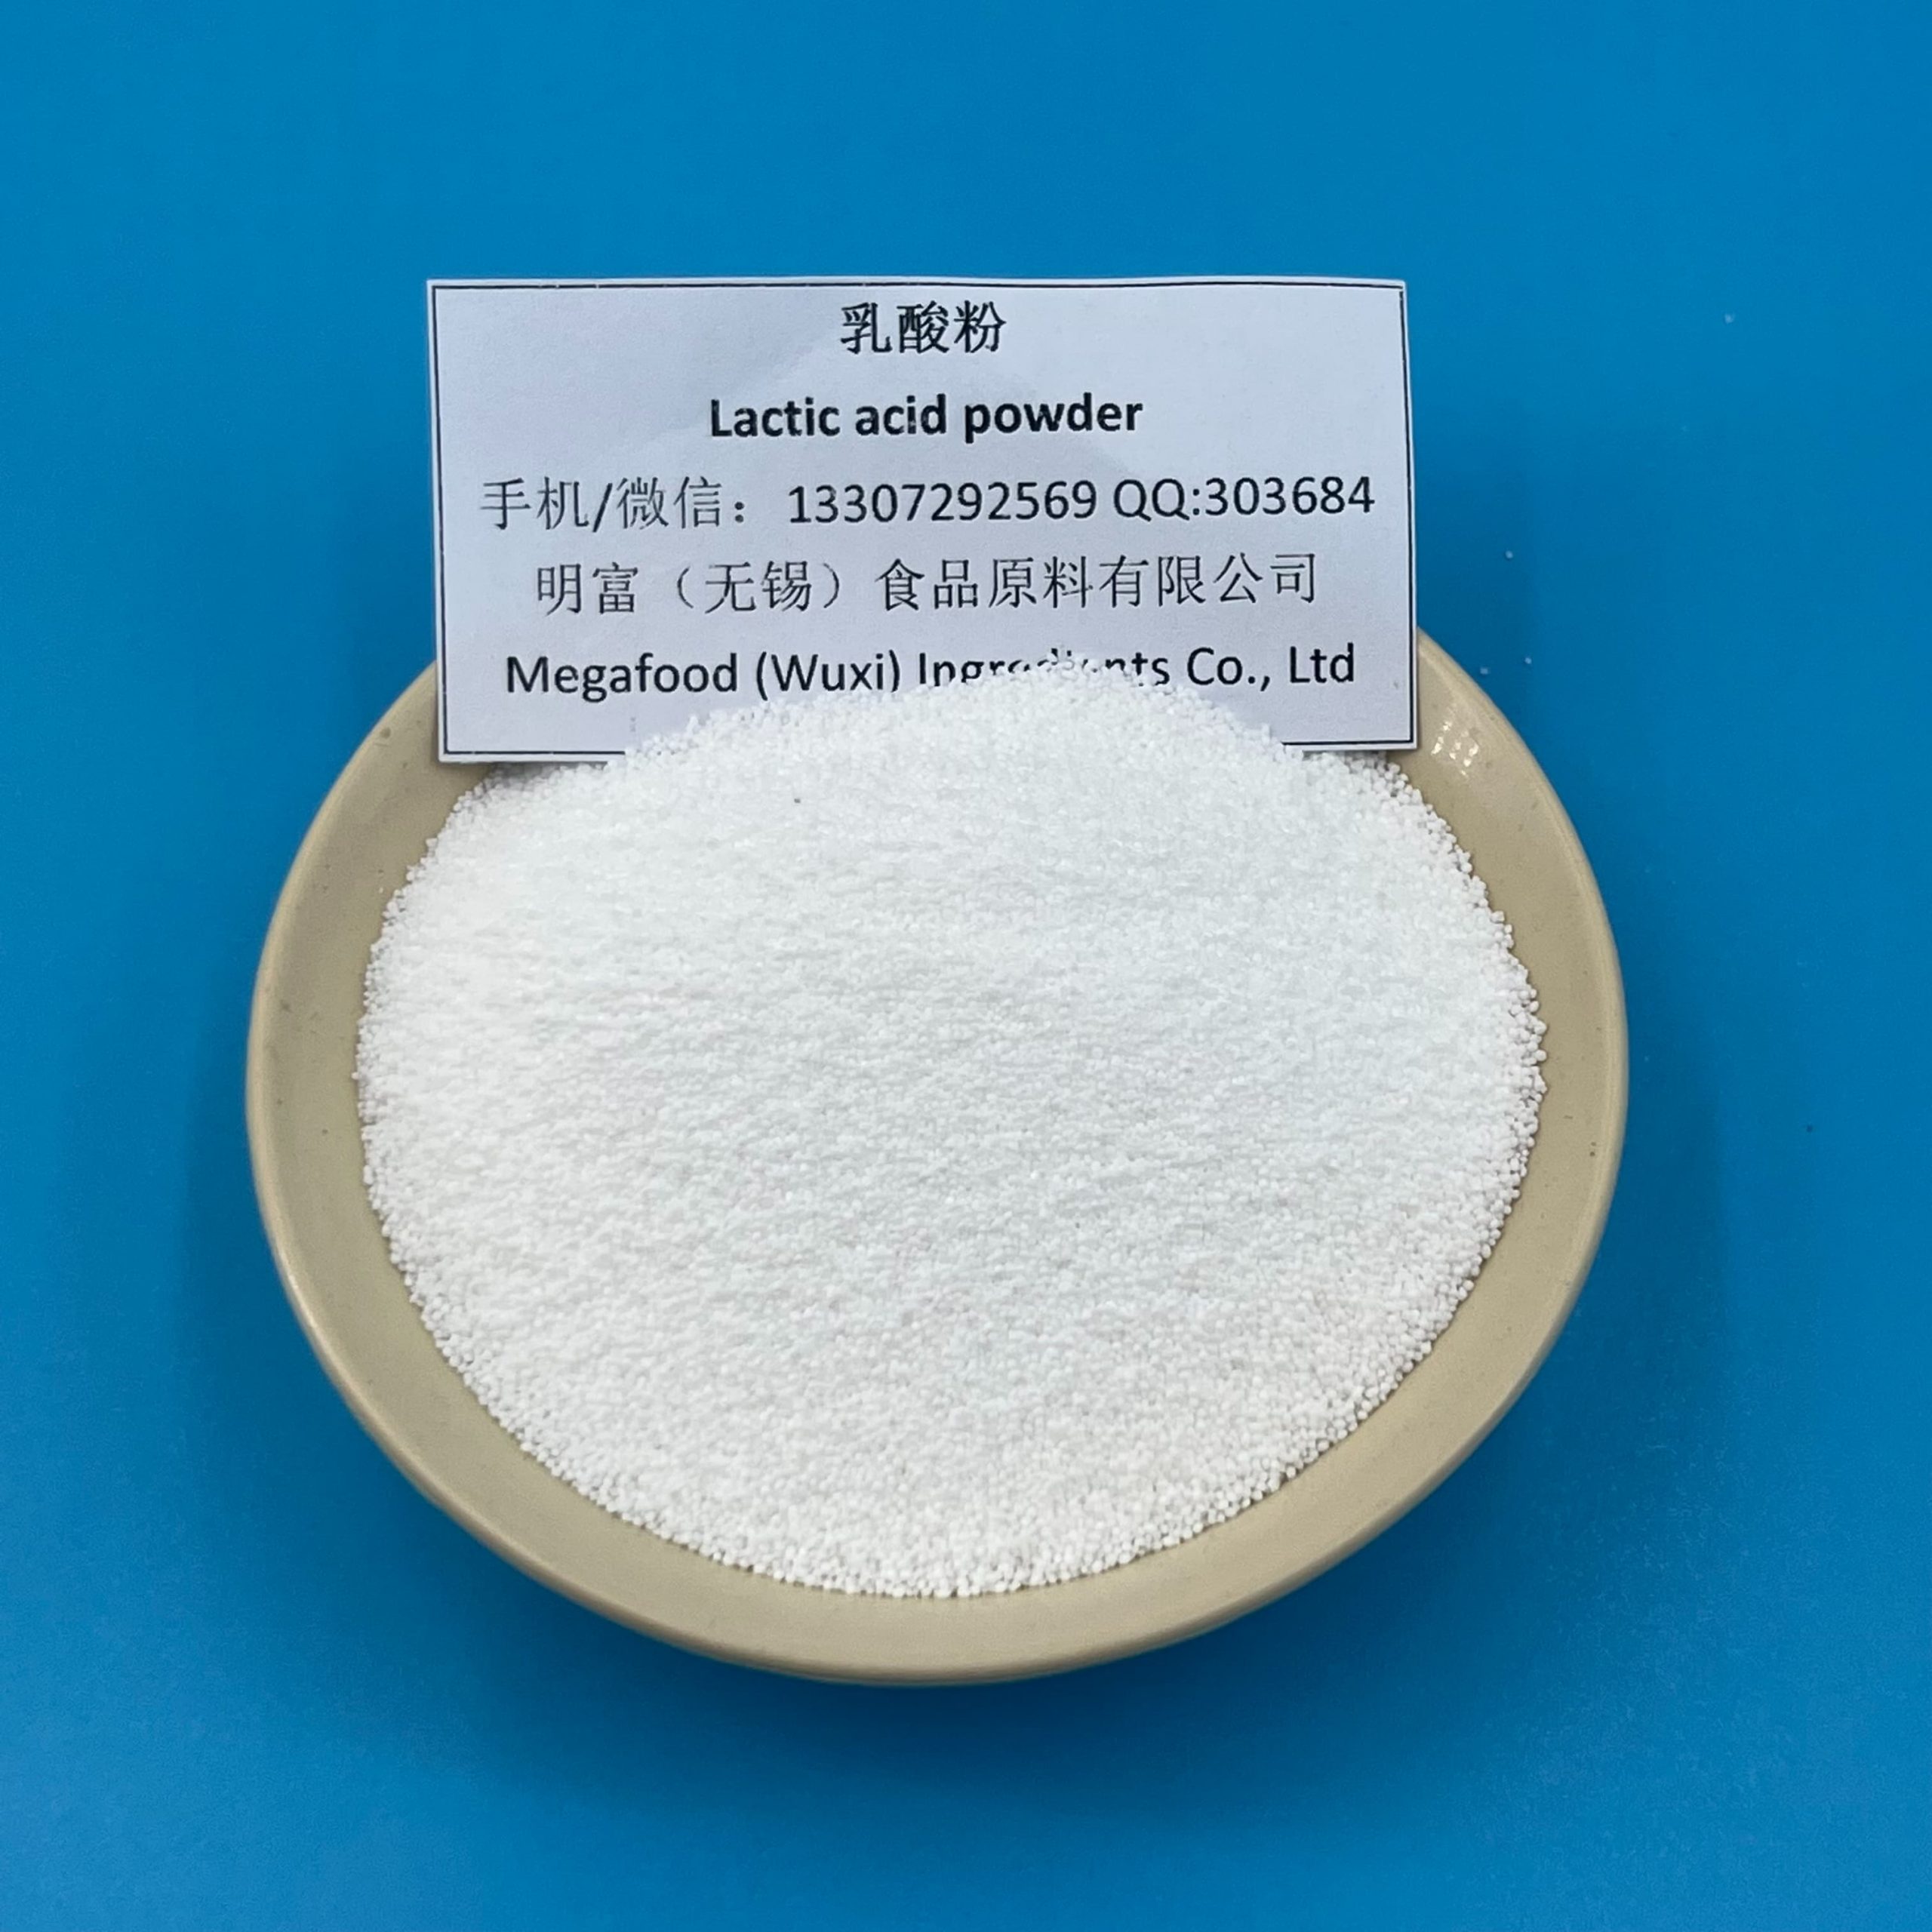 Produce High Quality Lactic Acid Powder at Good Price